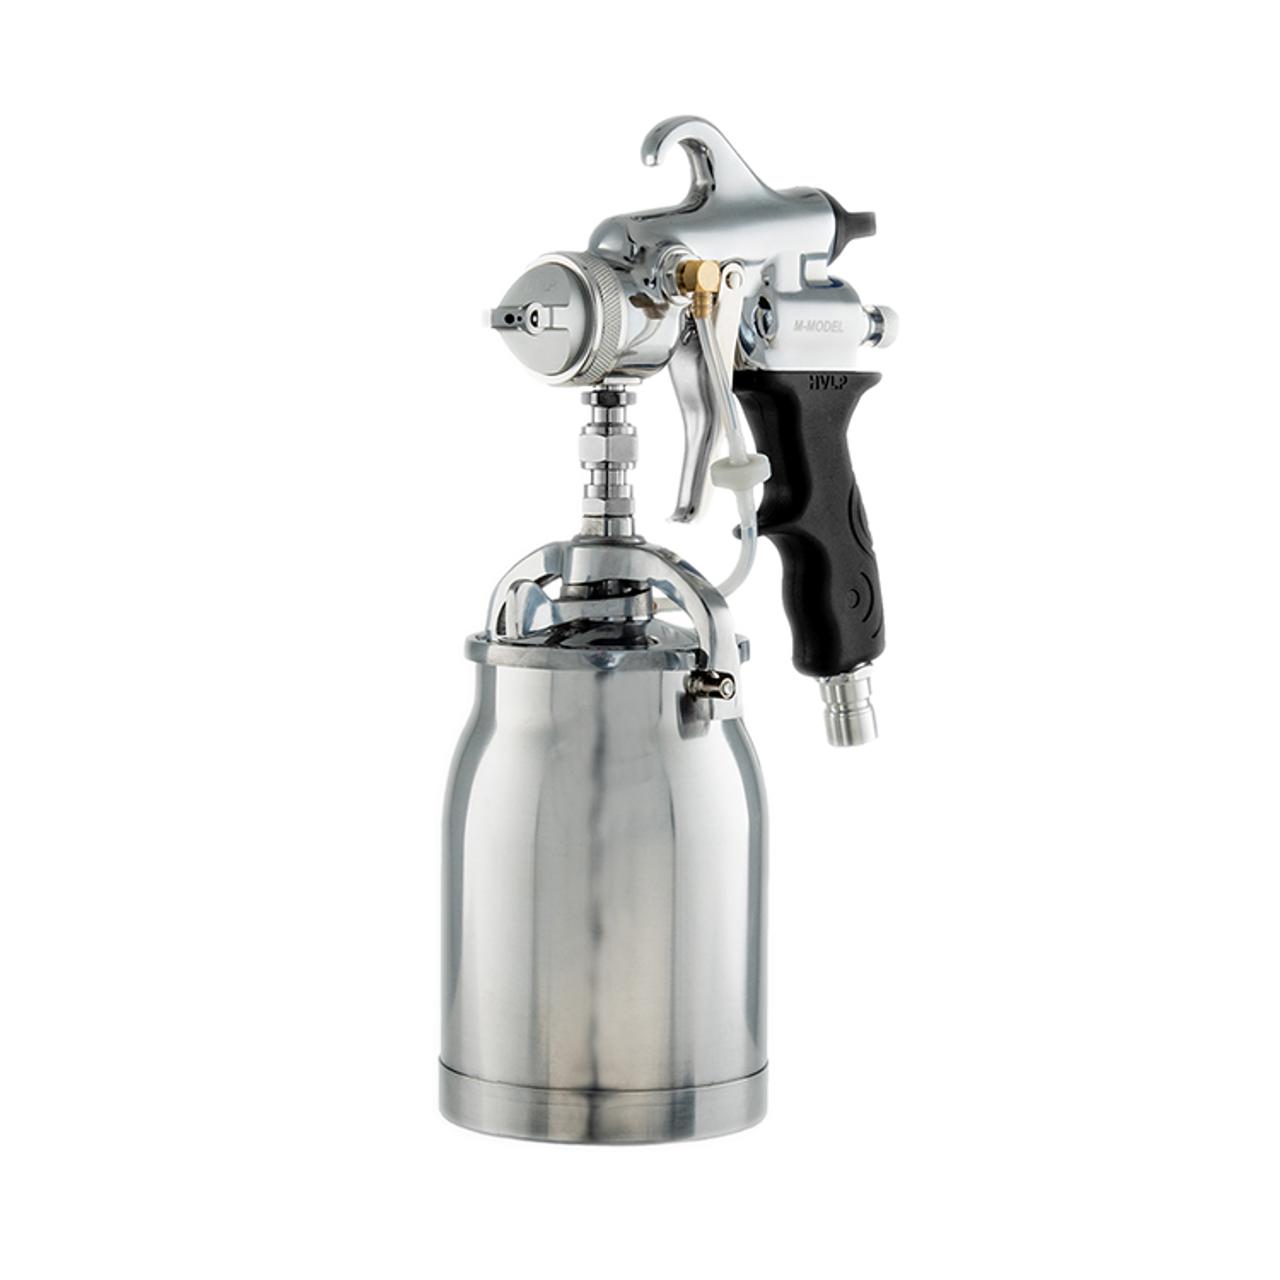 what is the needle size on the EAH Industrial Turbine HVLP Spray Gun